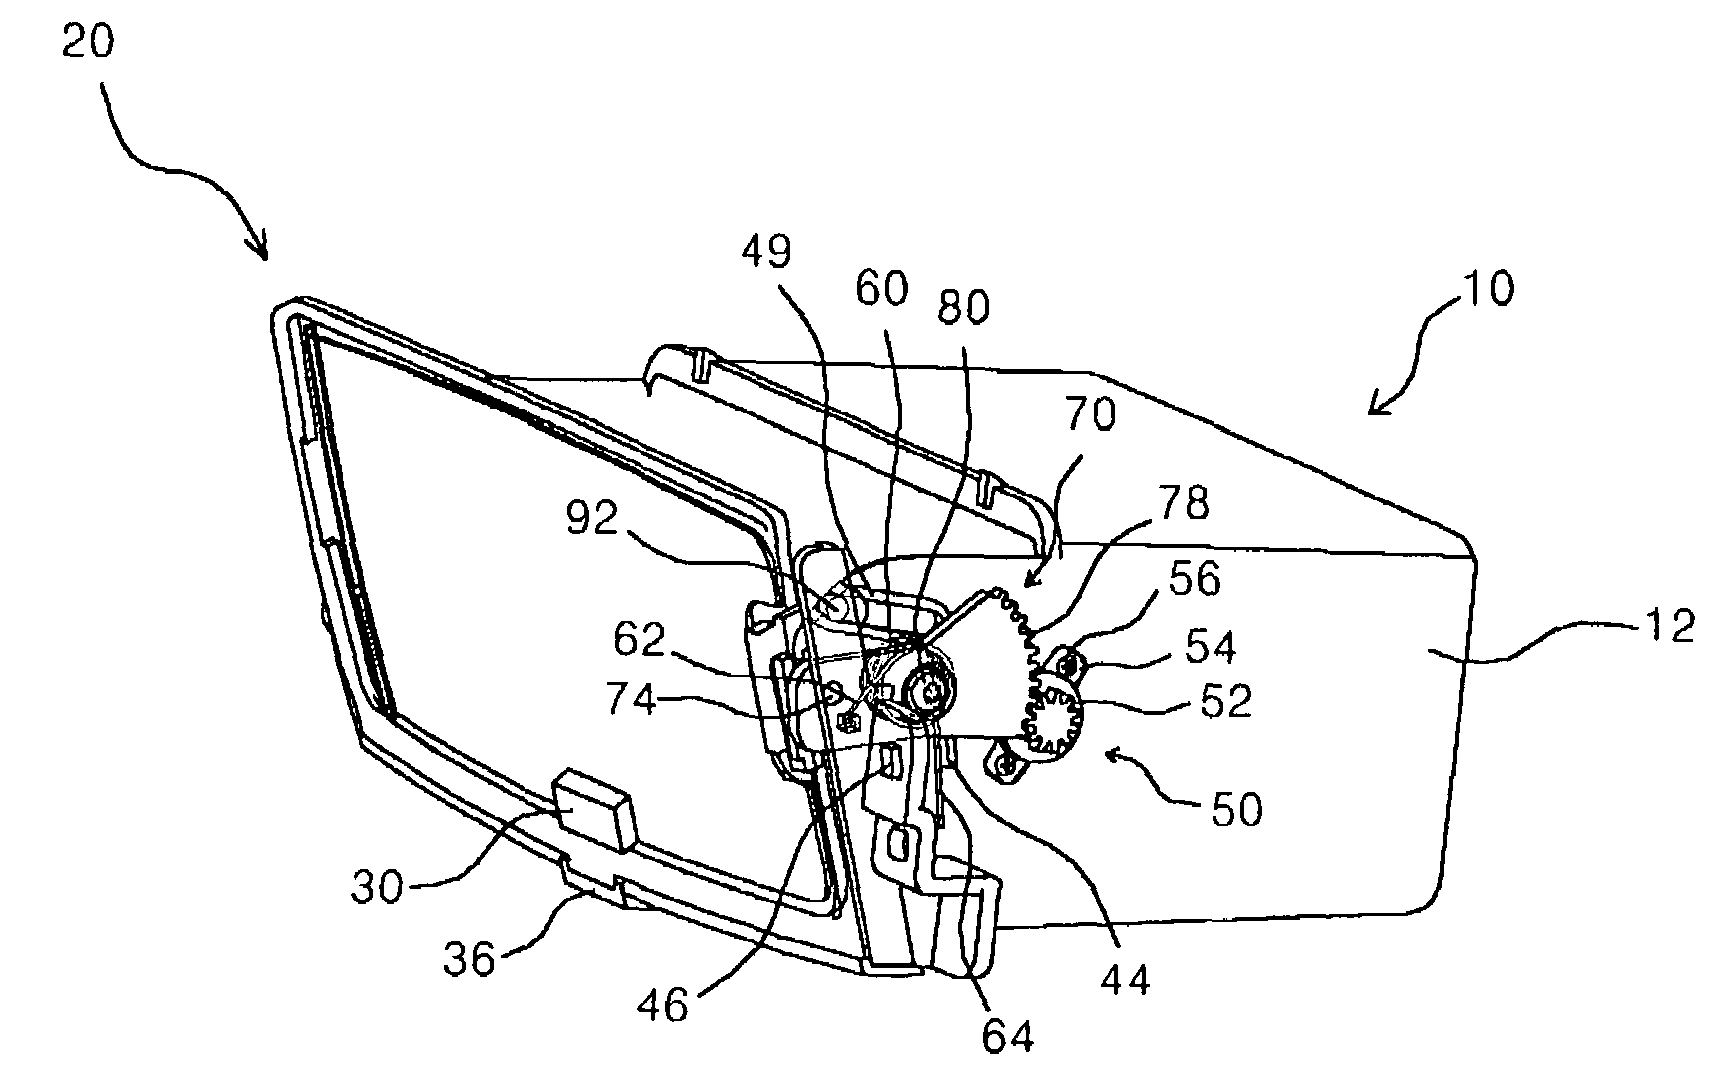 Open-type tray having a door configured to be received within an inner side thereof